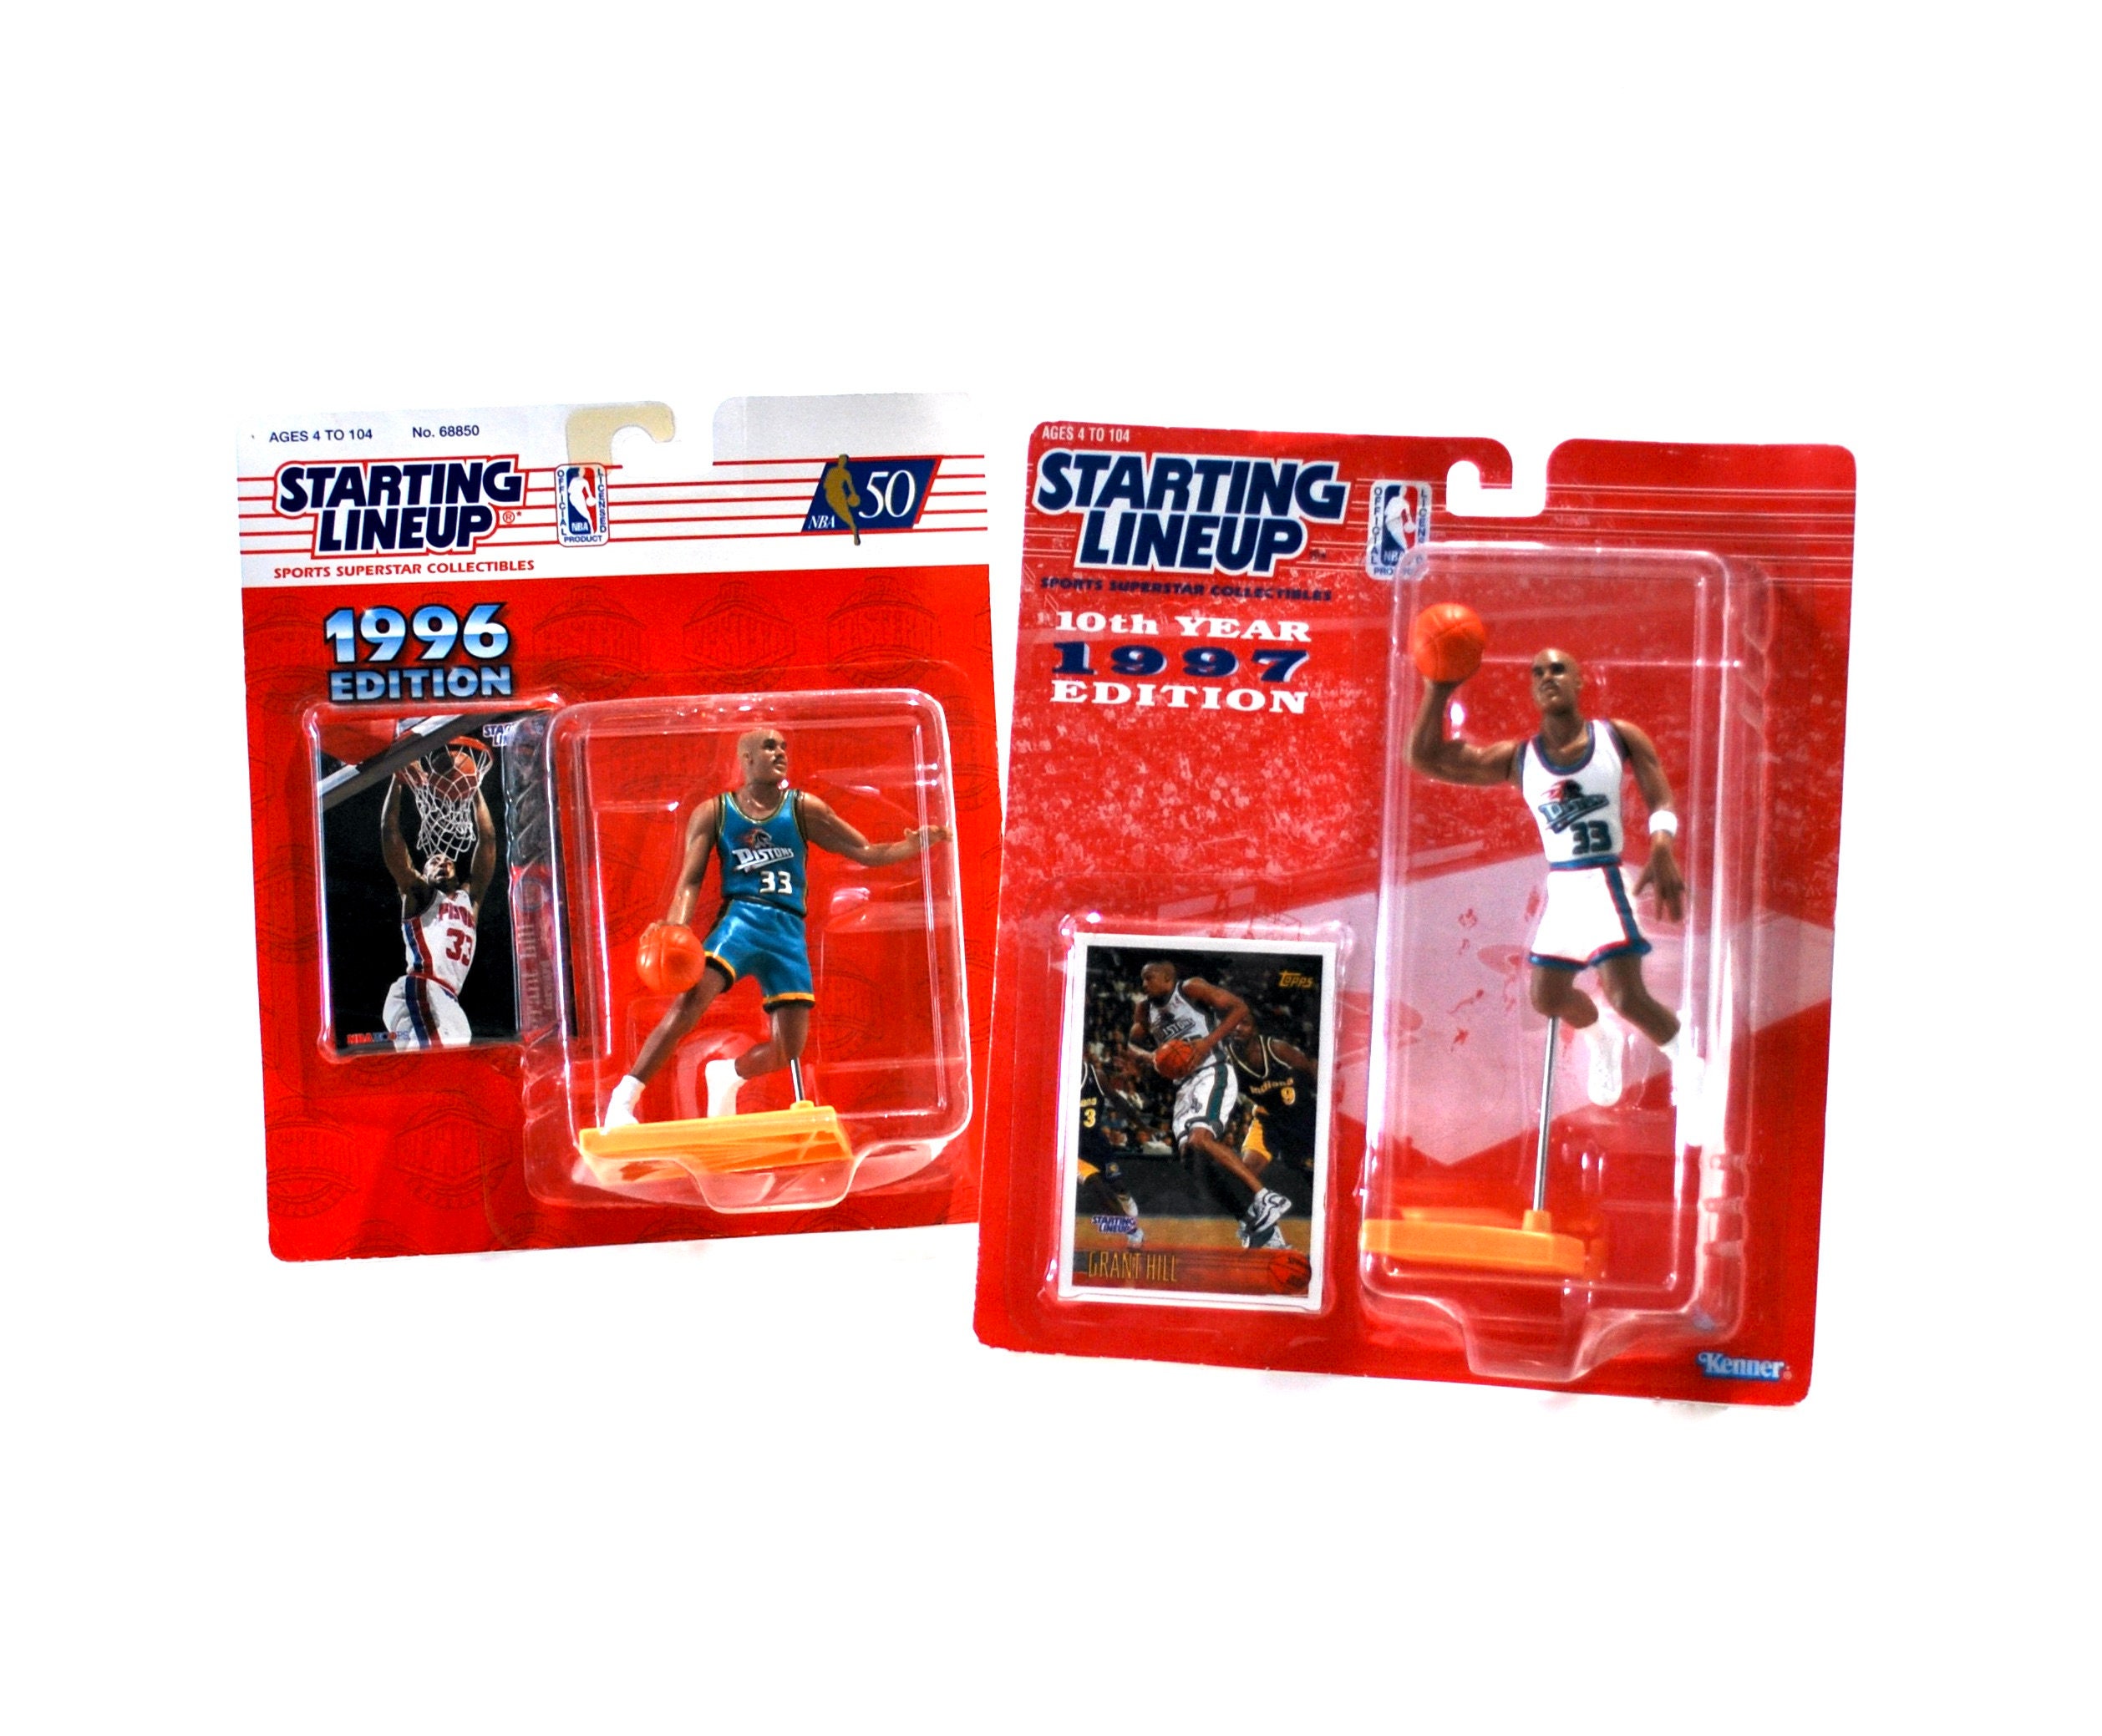 Grant Hill NBA Action Figures for sale